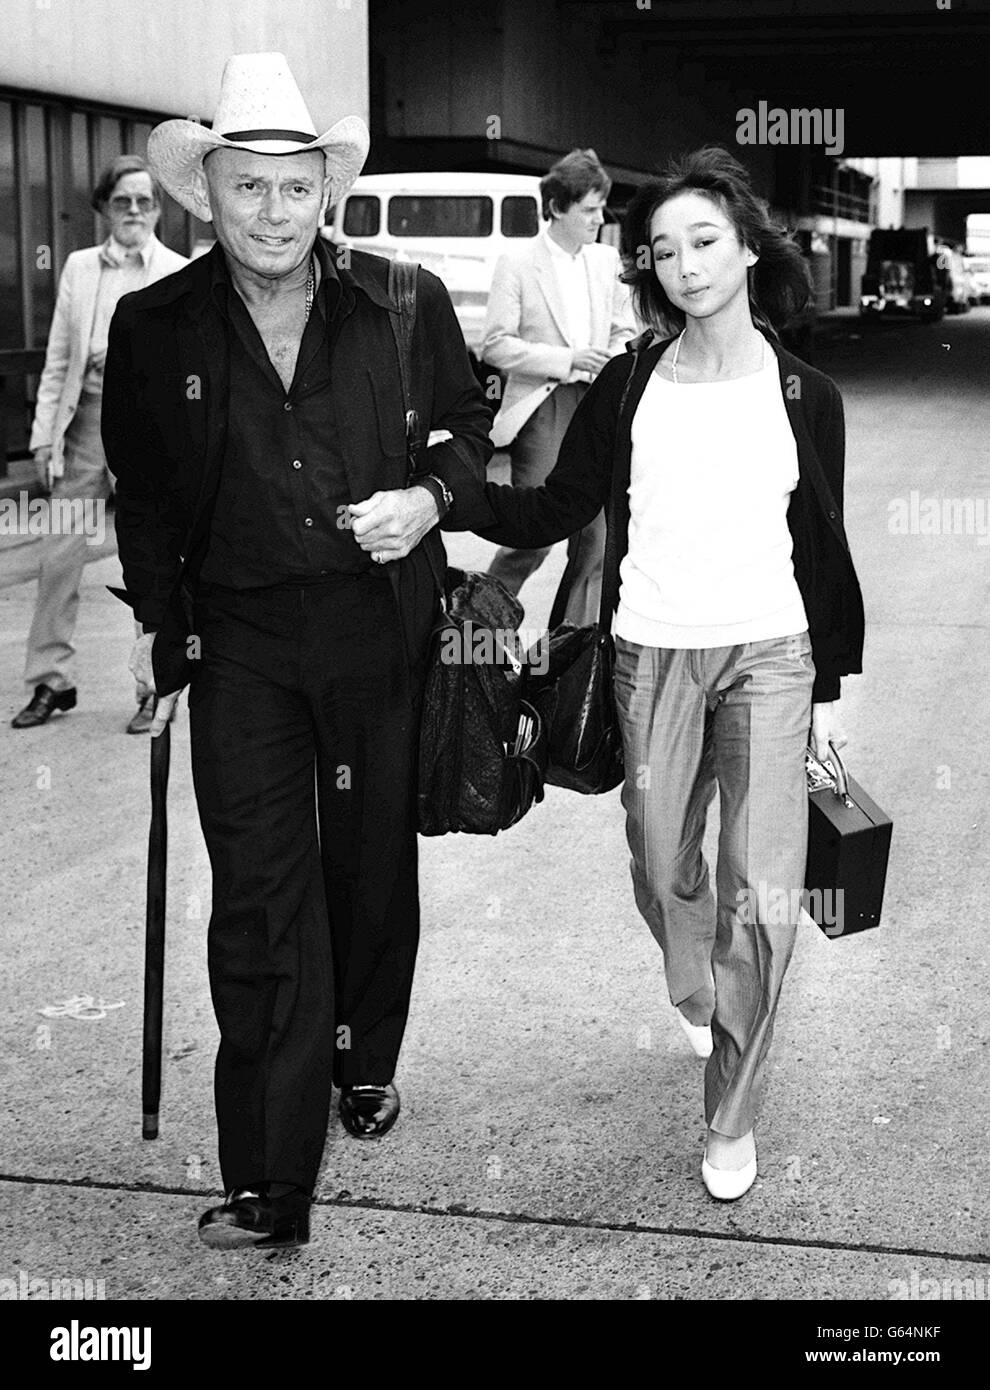 Film actor Yul Brynner with his wife of two months, 25-year-old Oriental dancer Kathy Lee arrive at Heathrow Airport from Los Angeles. Yul married Kathy, some 40 years his junior, in April only eleven days after the annulment of his previous marriage. Stock Photo